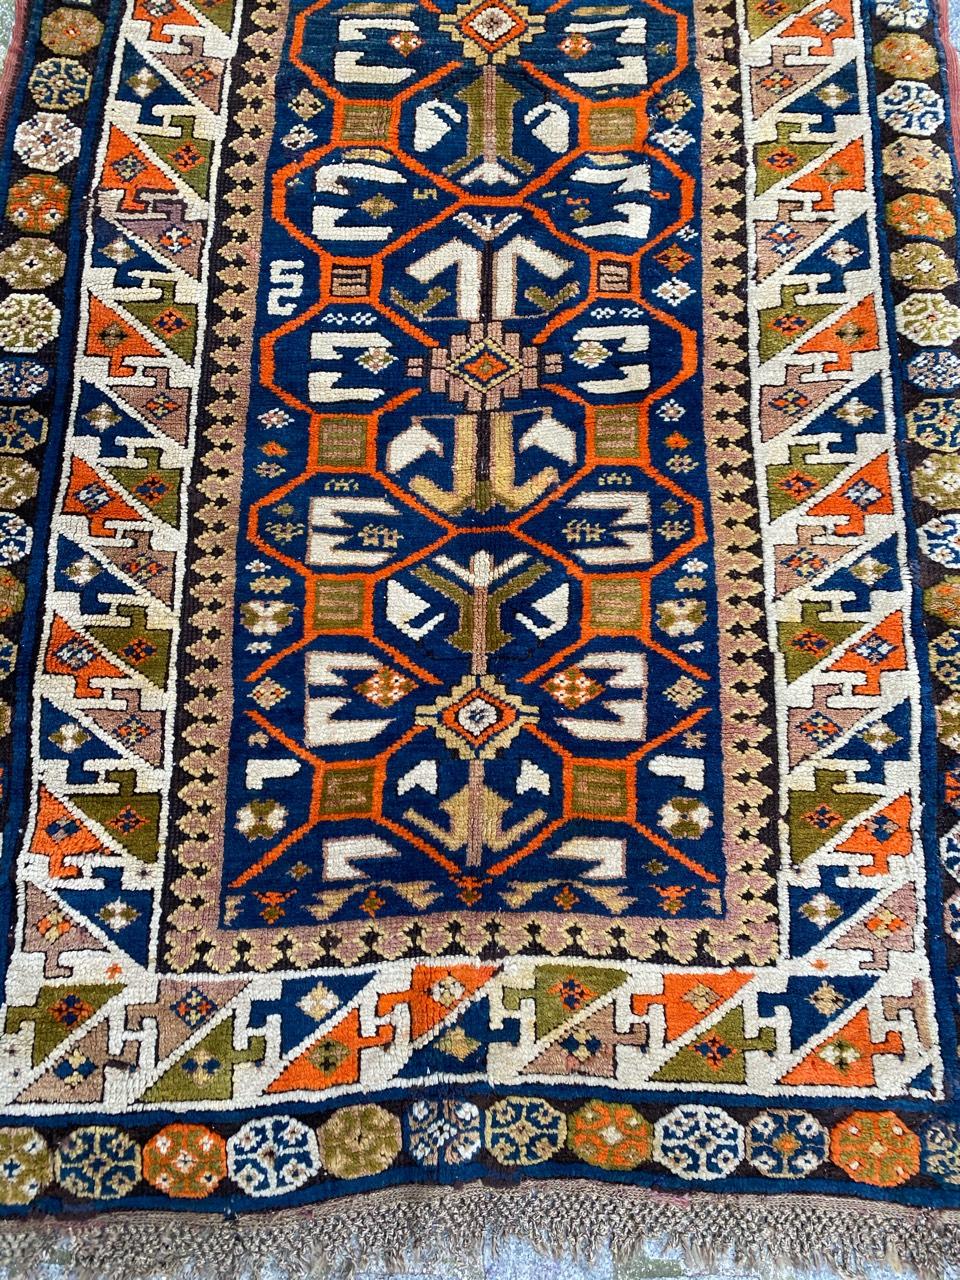 Beautiful Kazak rug with nice geometrical design and beautiful colors with orange, green, yellow, purple and blue, entirely hand knotted with wool velvet on wool foundation.

✨✨✨
